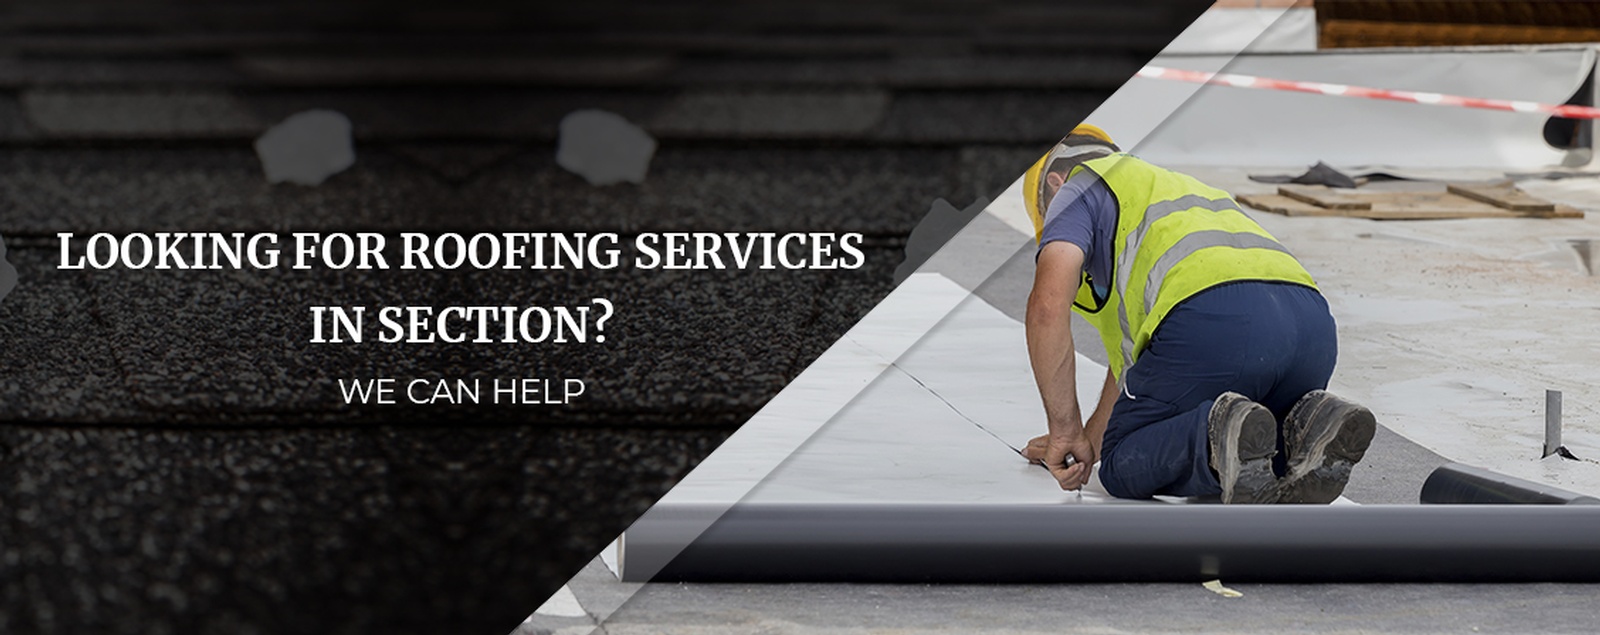 Looking For Roofing Services In Section We Can Help